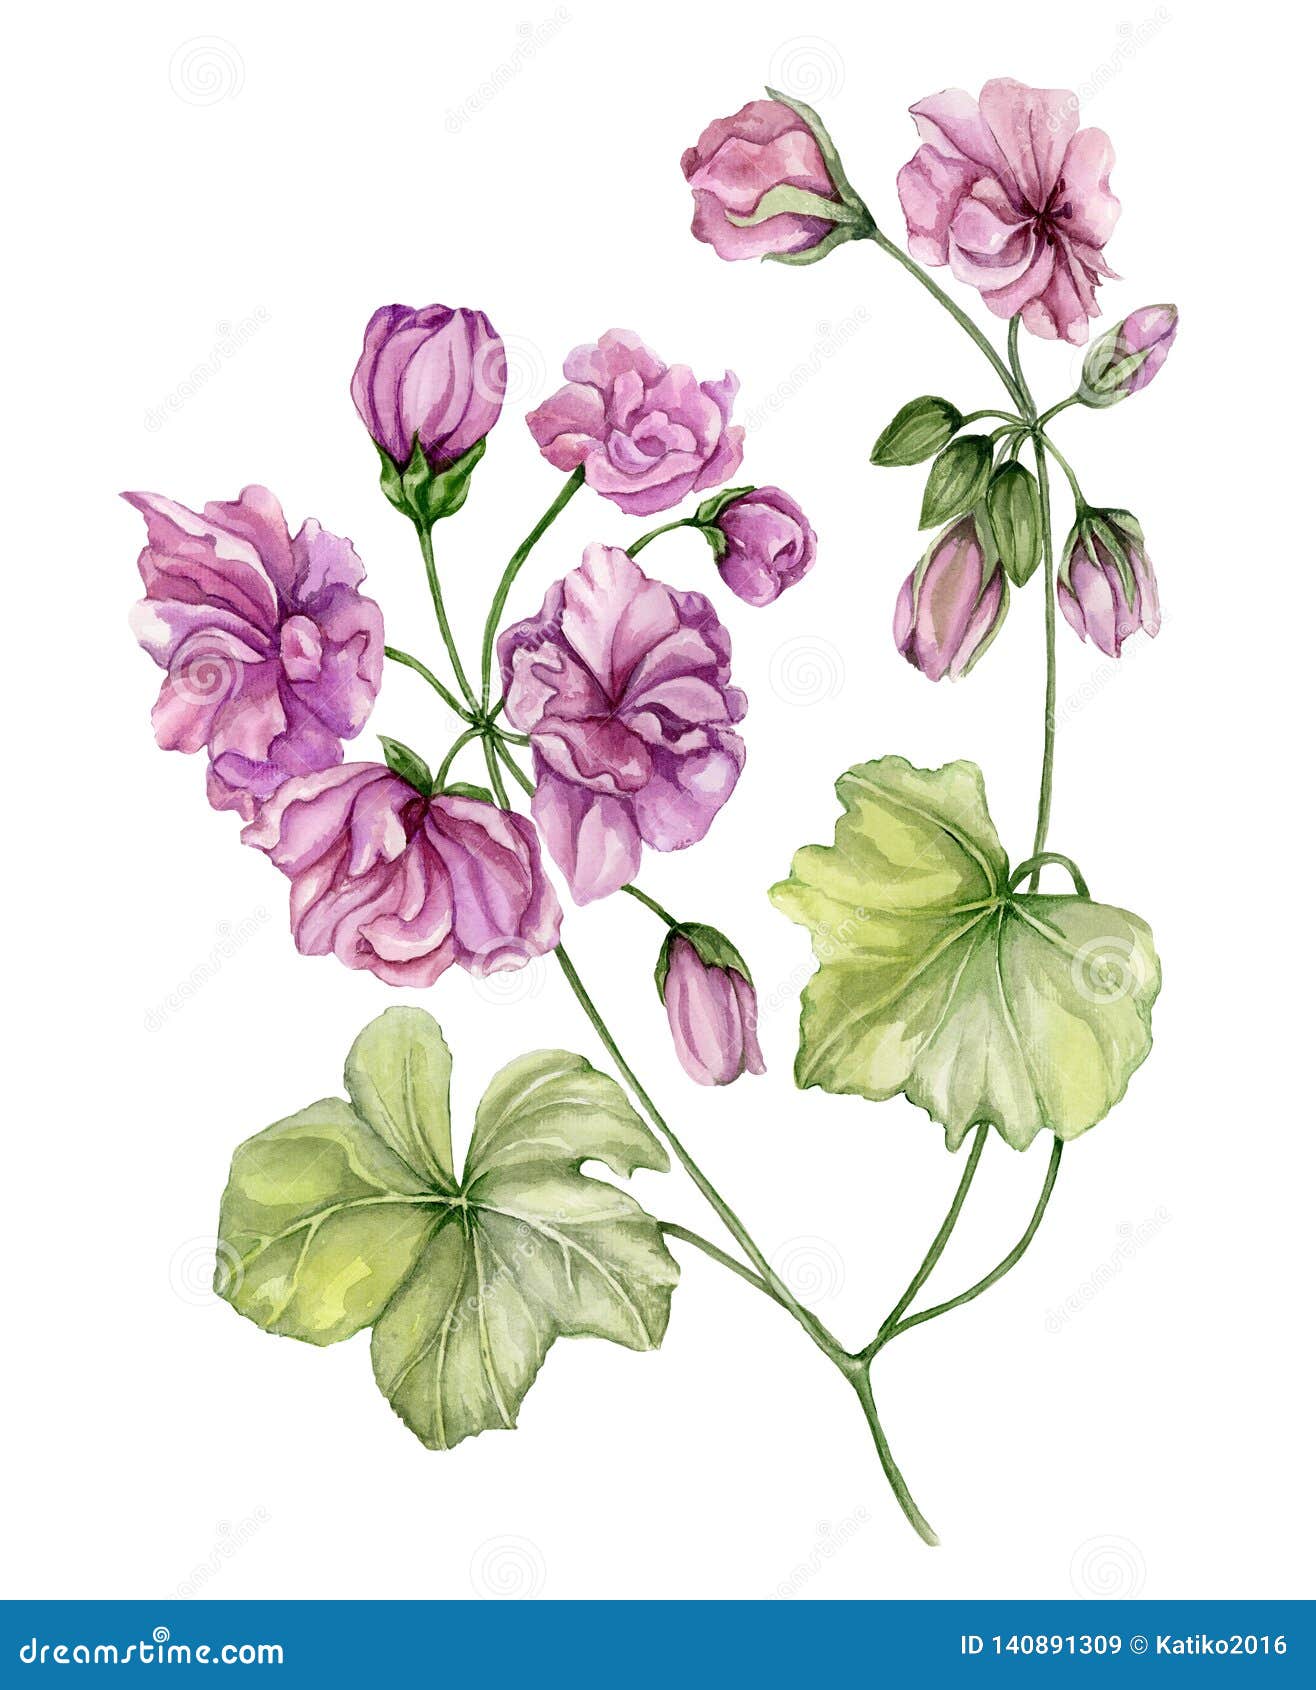 Beautiful Pelargonium Flower Twig with Green Leaves and Closed Buds ...